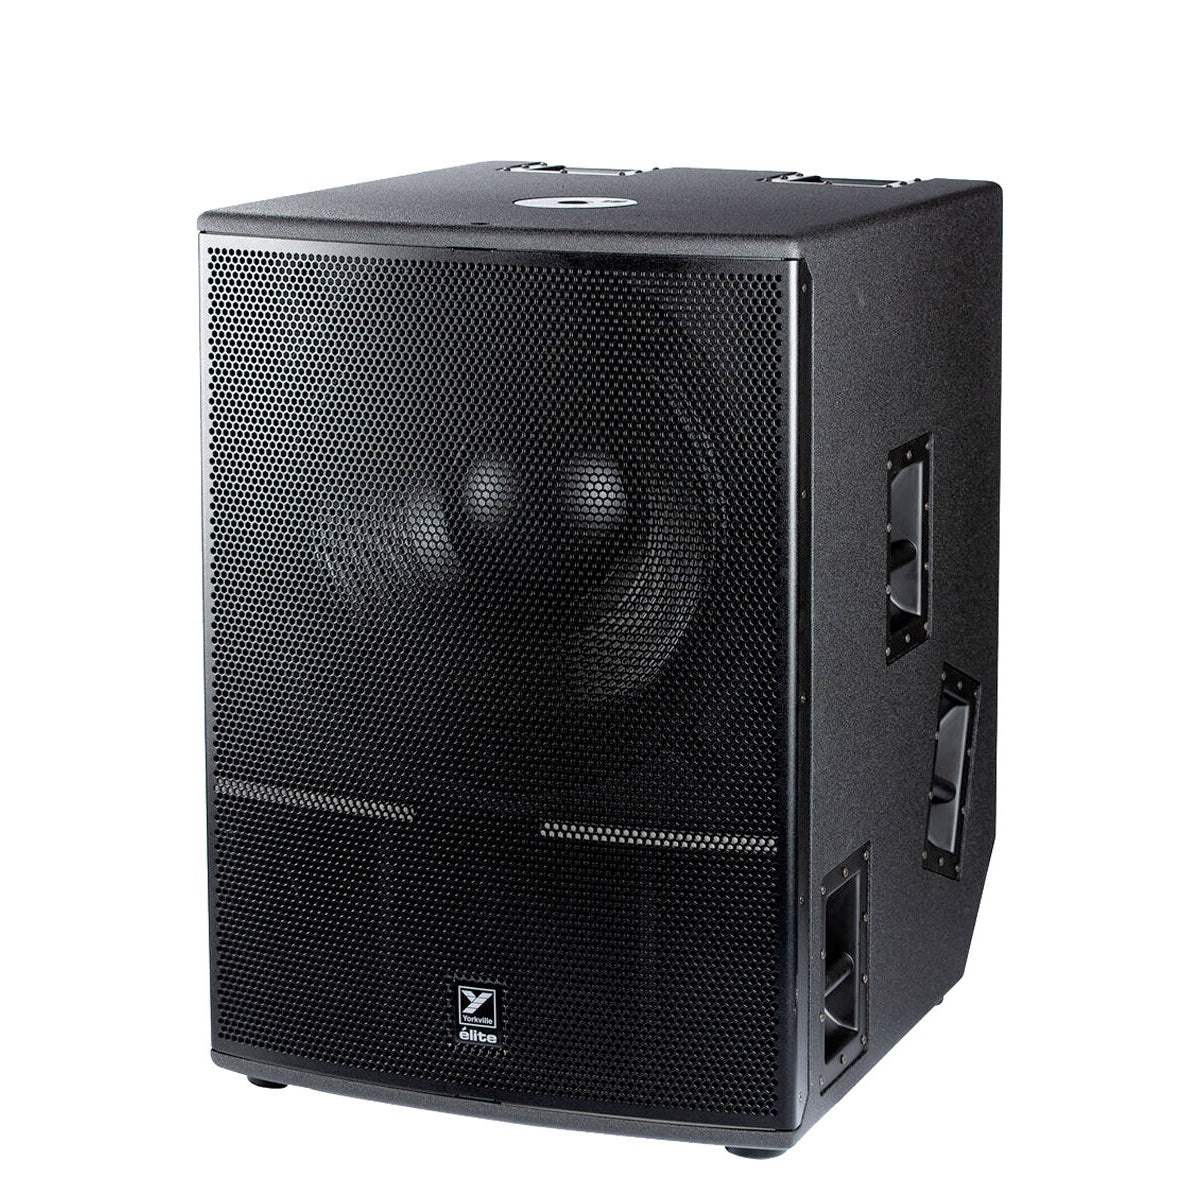 Yorkville ES21P Elite Series 21" 2400W Powered Subwoofer with Bluetooth Control